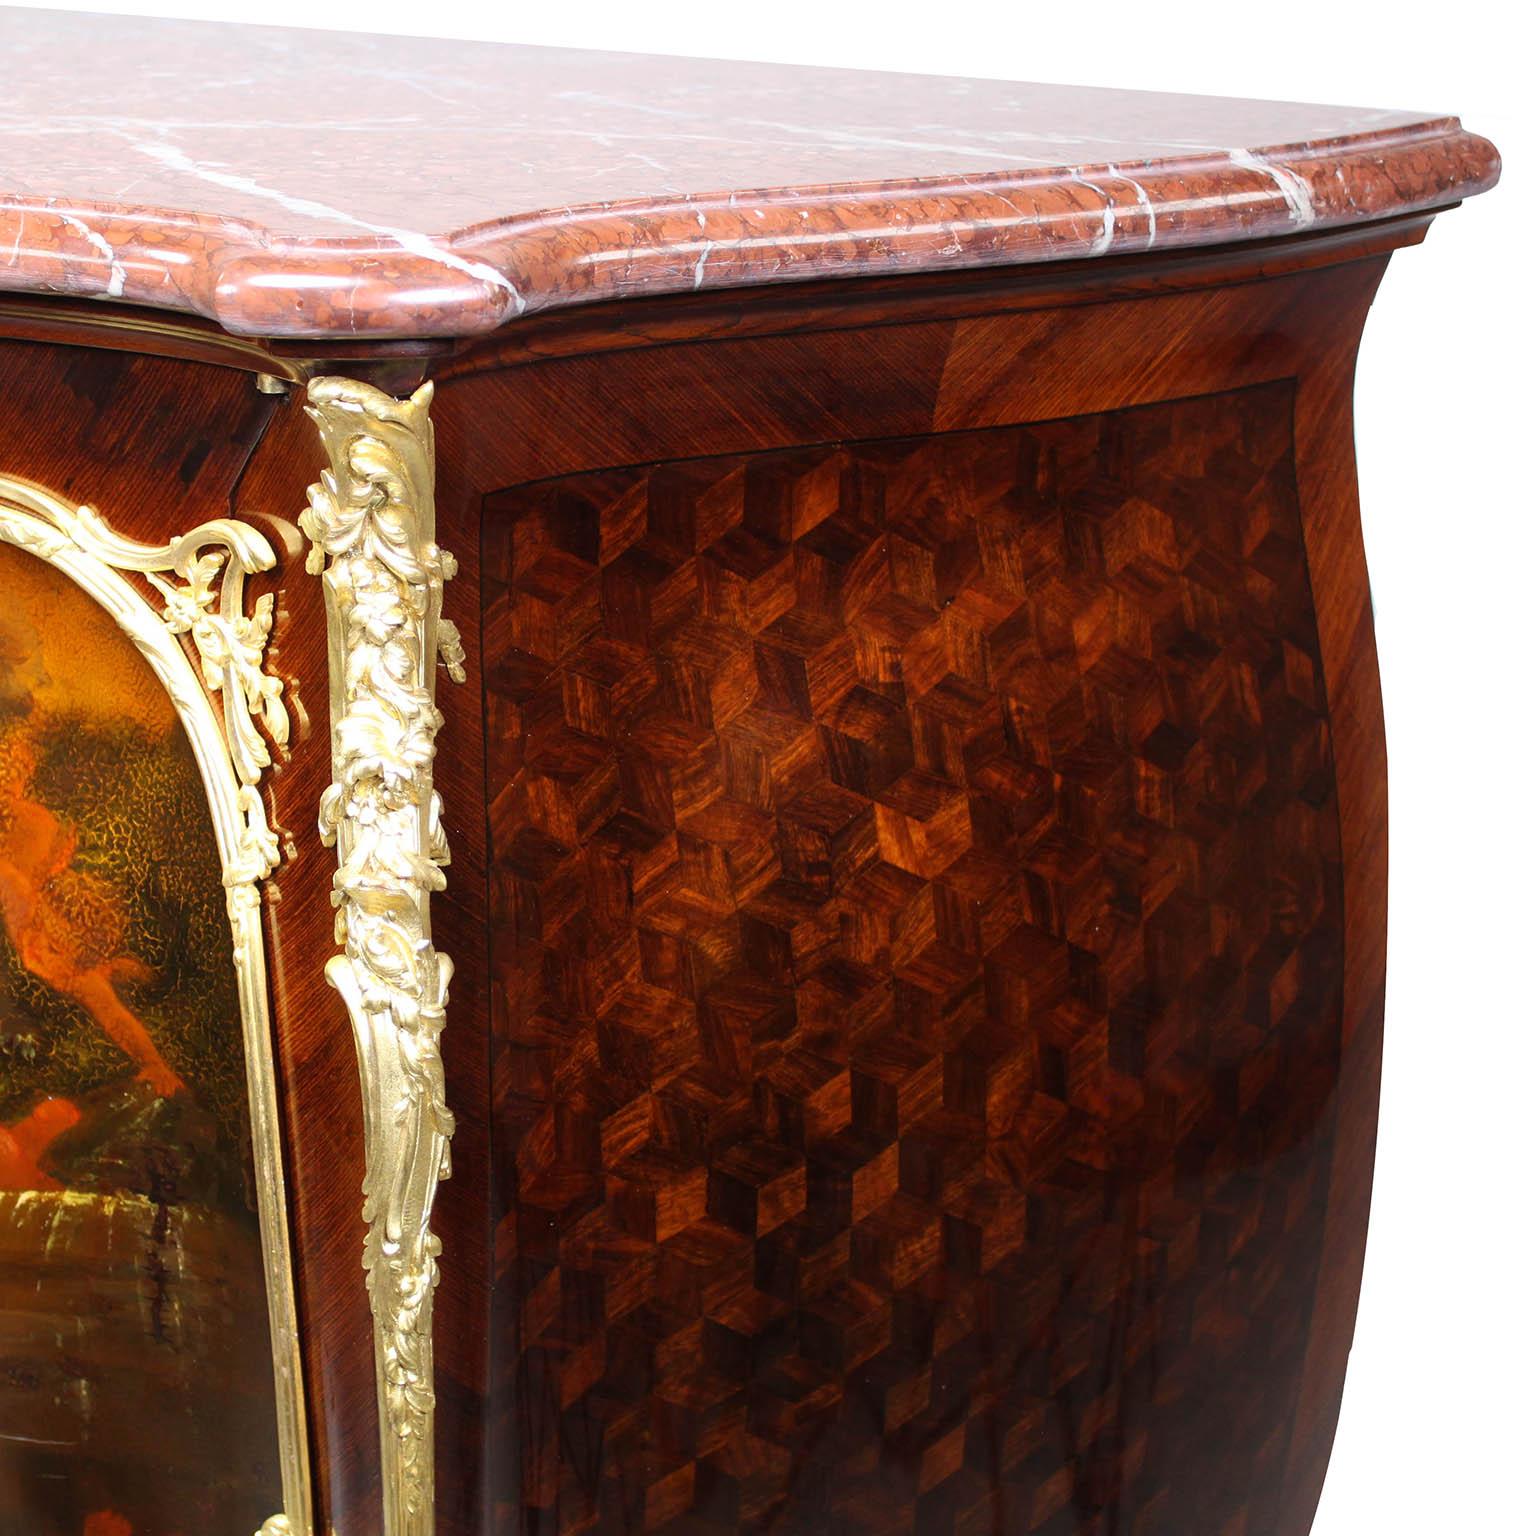 French 19th C. Louis XV Style Ormolu-Mounted Vernis Martin Cabinet by F. Linke For Sale 1